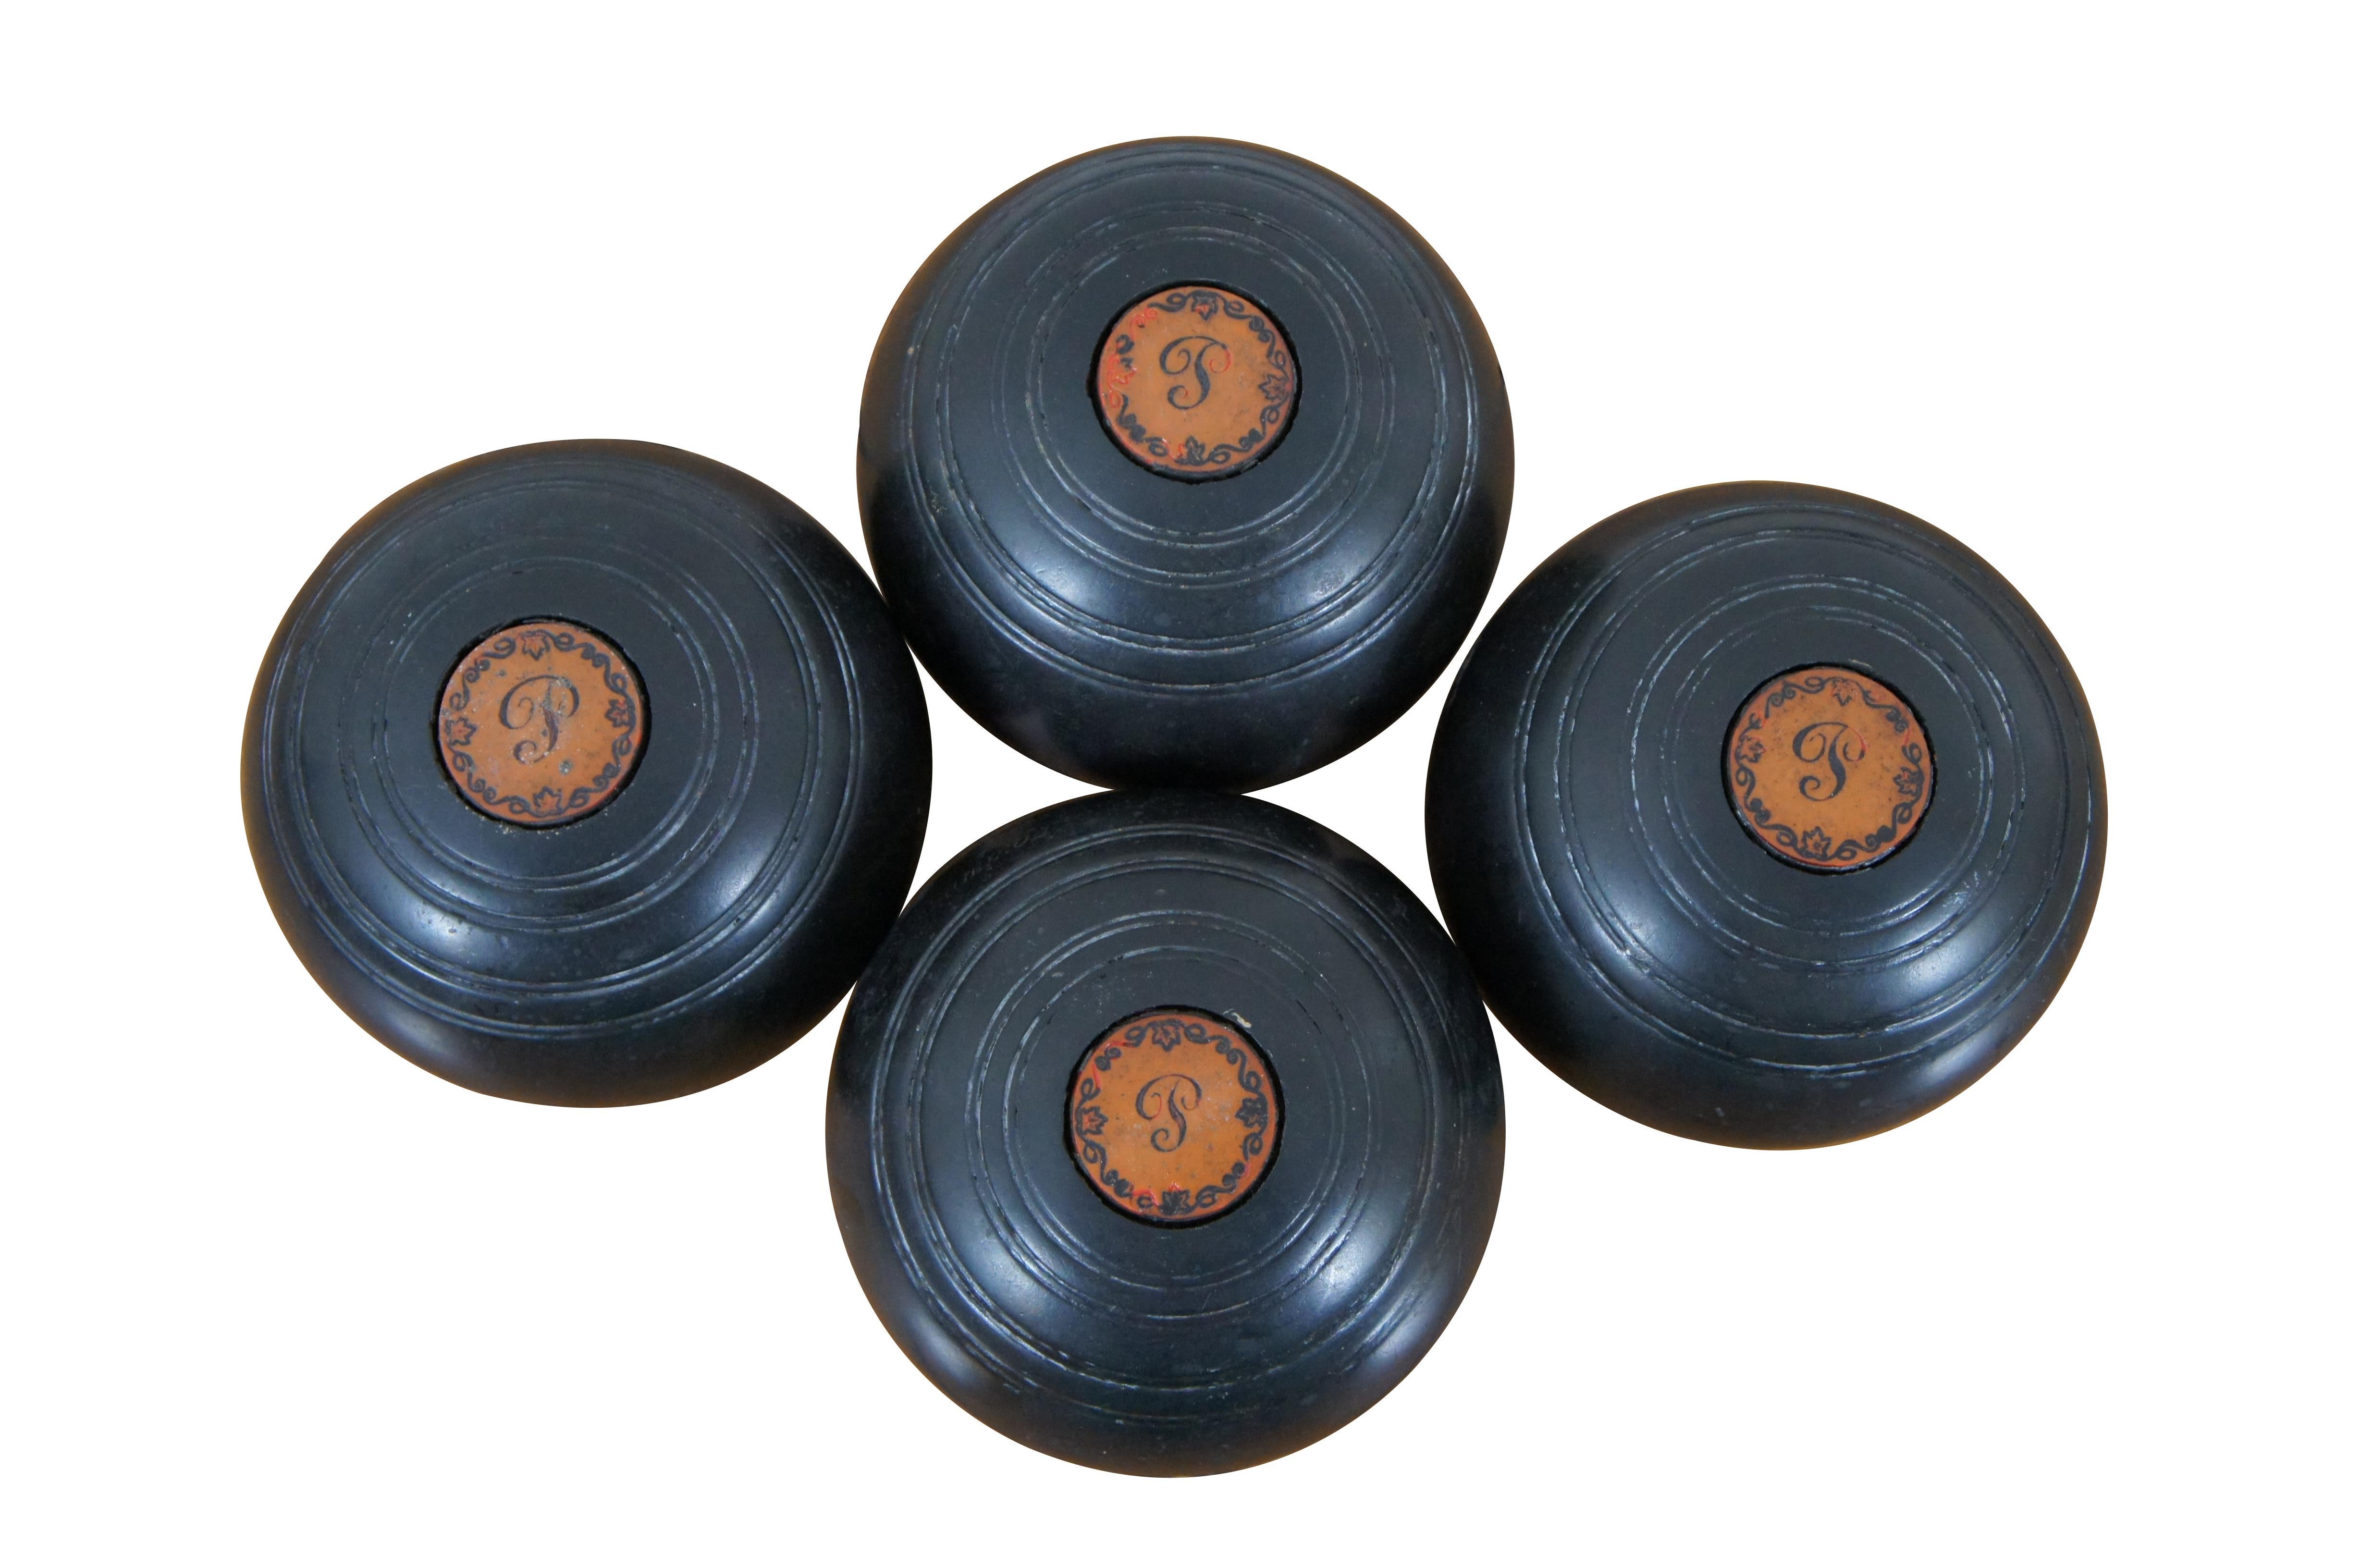 Set of 4 antique Townsend & Clark Champion black lawn bowling bocce balls monogramed with the initial P, surrounded by ivy. Made in Toronto, Canada, 1947. 

Bocce (/ˈbɒtʃi/,[1][2] or /ˈbɒtʃeɪ/,[3] Italian: [ˈbɔttʃe]), sometimes anglicized as bocce